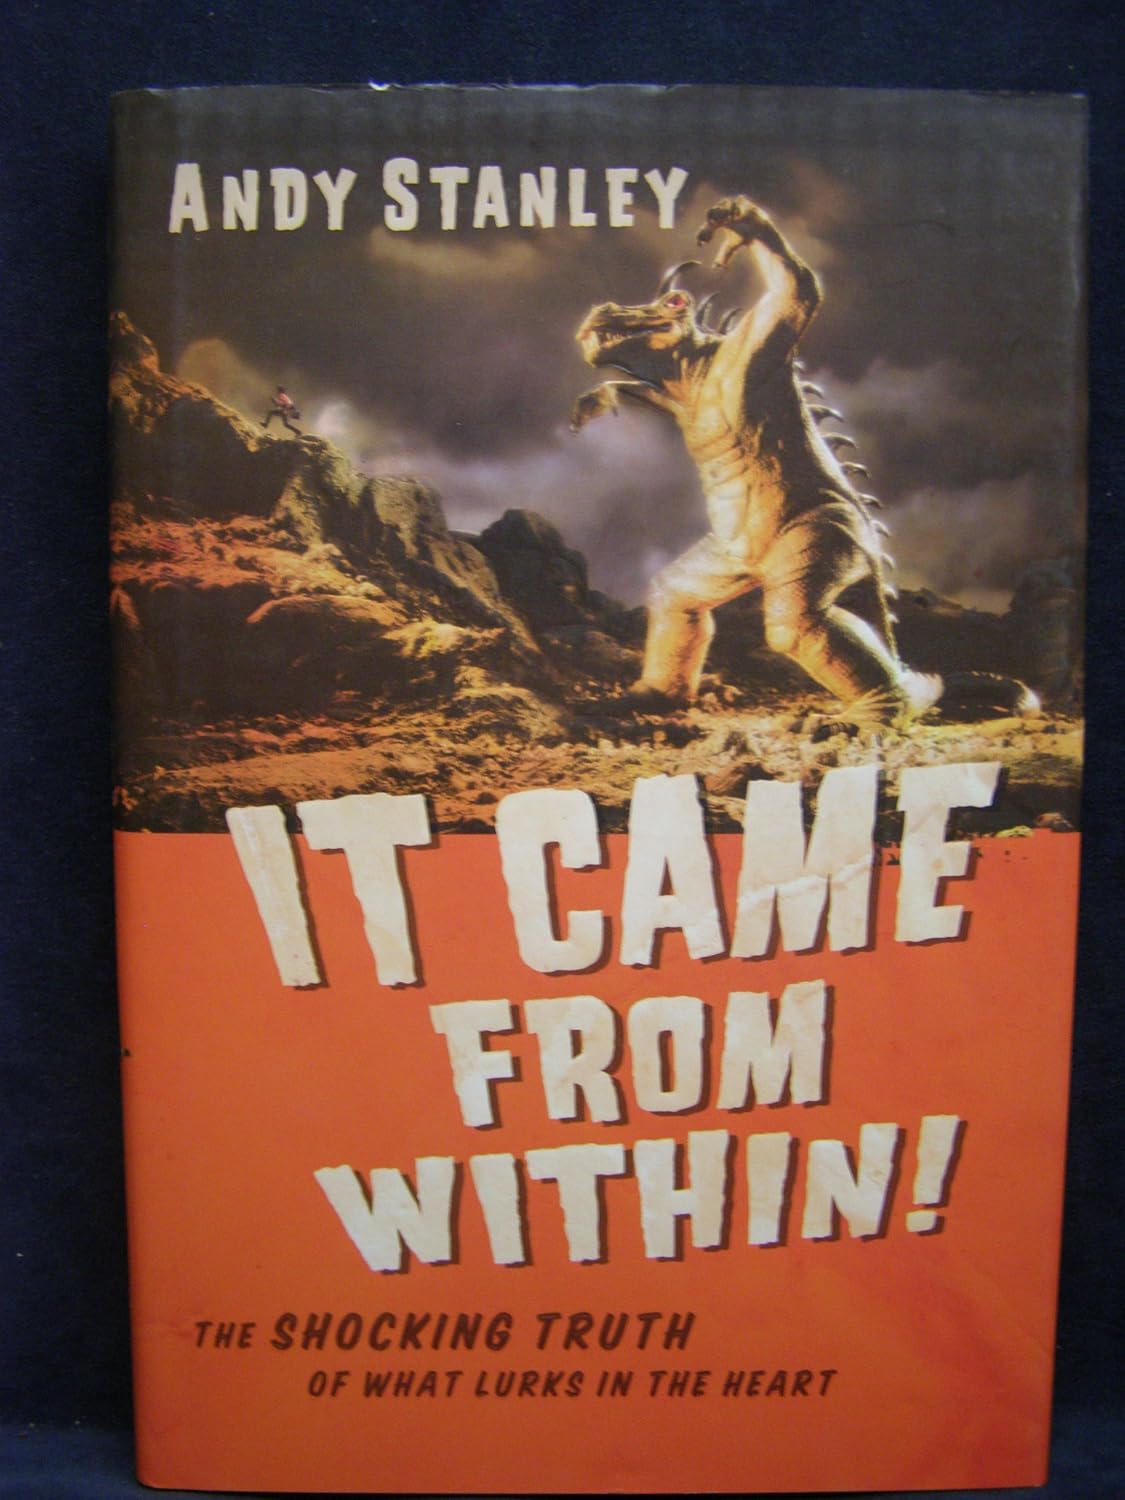 It Came from Within!: The Shocking Truth of What Lurks in the Heart (hardcover) Andy Stanley